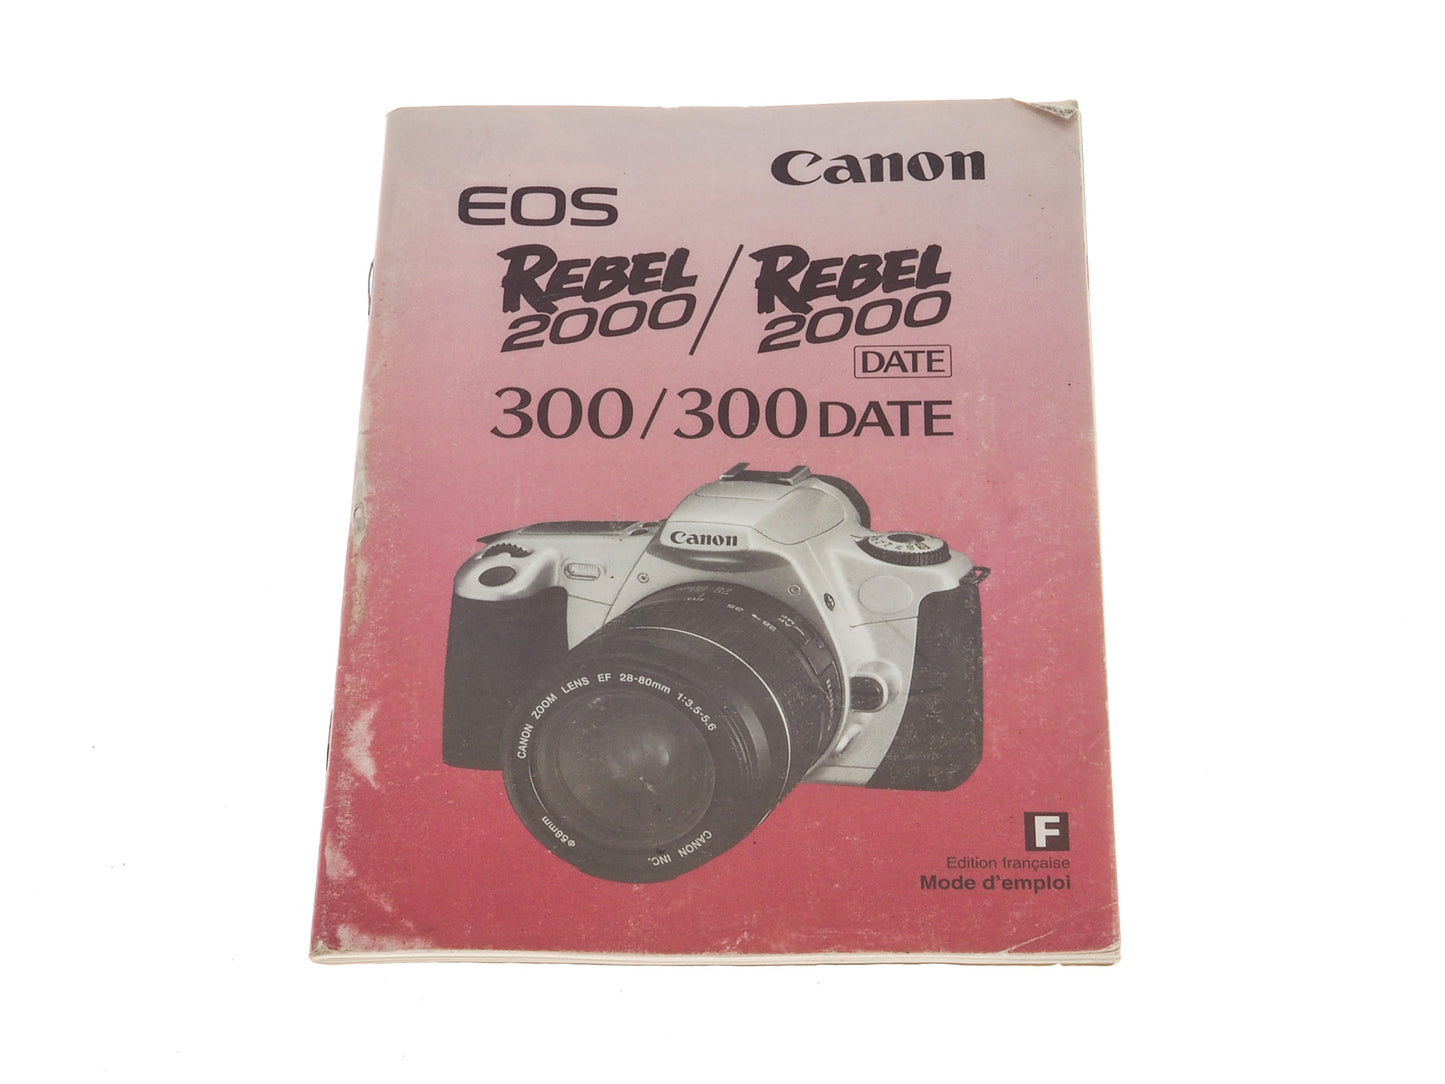 Canon EOS Rebel 2000/300(Date) Instructions